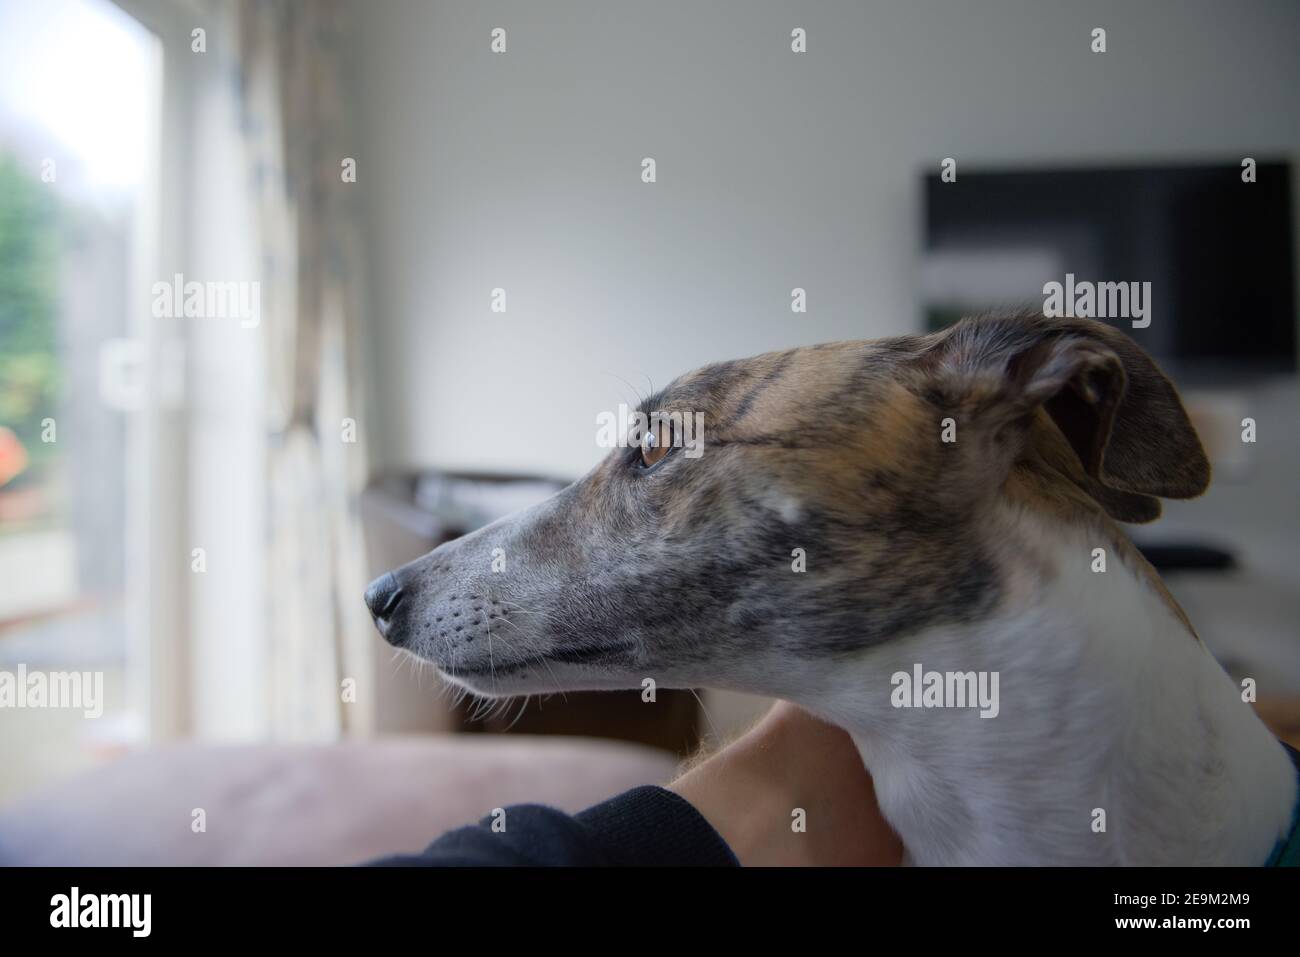 A domesticated pet adopted greyhound looks out into the garden through patio doors whilst her owner pats and calms her. Living room or lounge setting Stock Photo